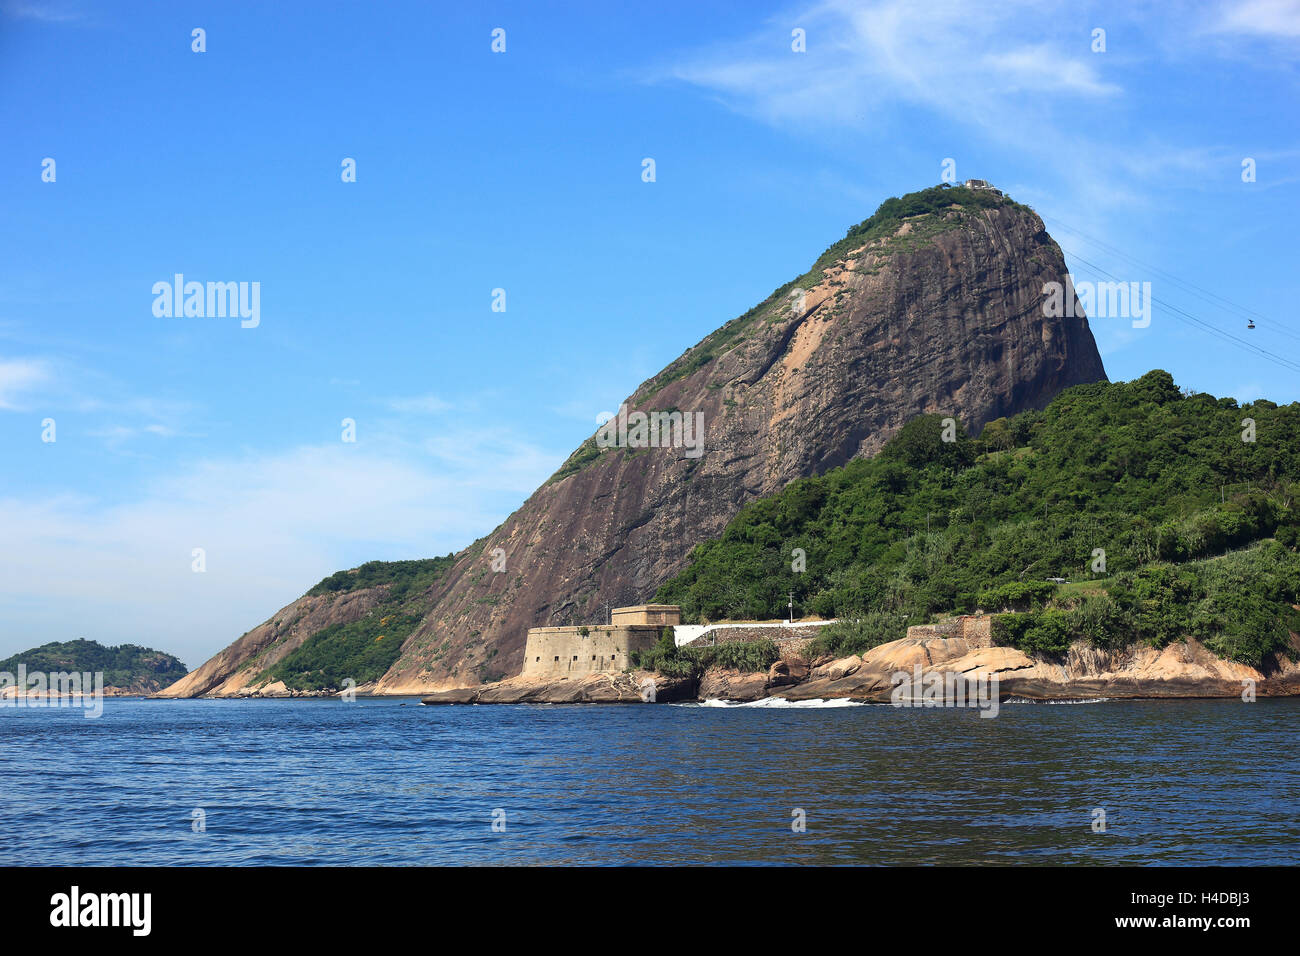 Look out on the sugar loaf the north, from the Baia de Guanabara, Rio de Janeiro, Brazil, view to the sugar loaf from the south, from the beach Praia Vermelha from seen, Brazil Stock Photo